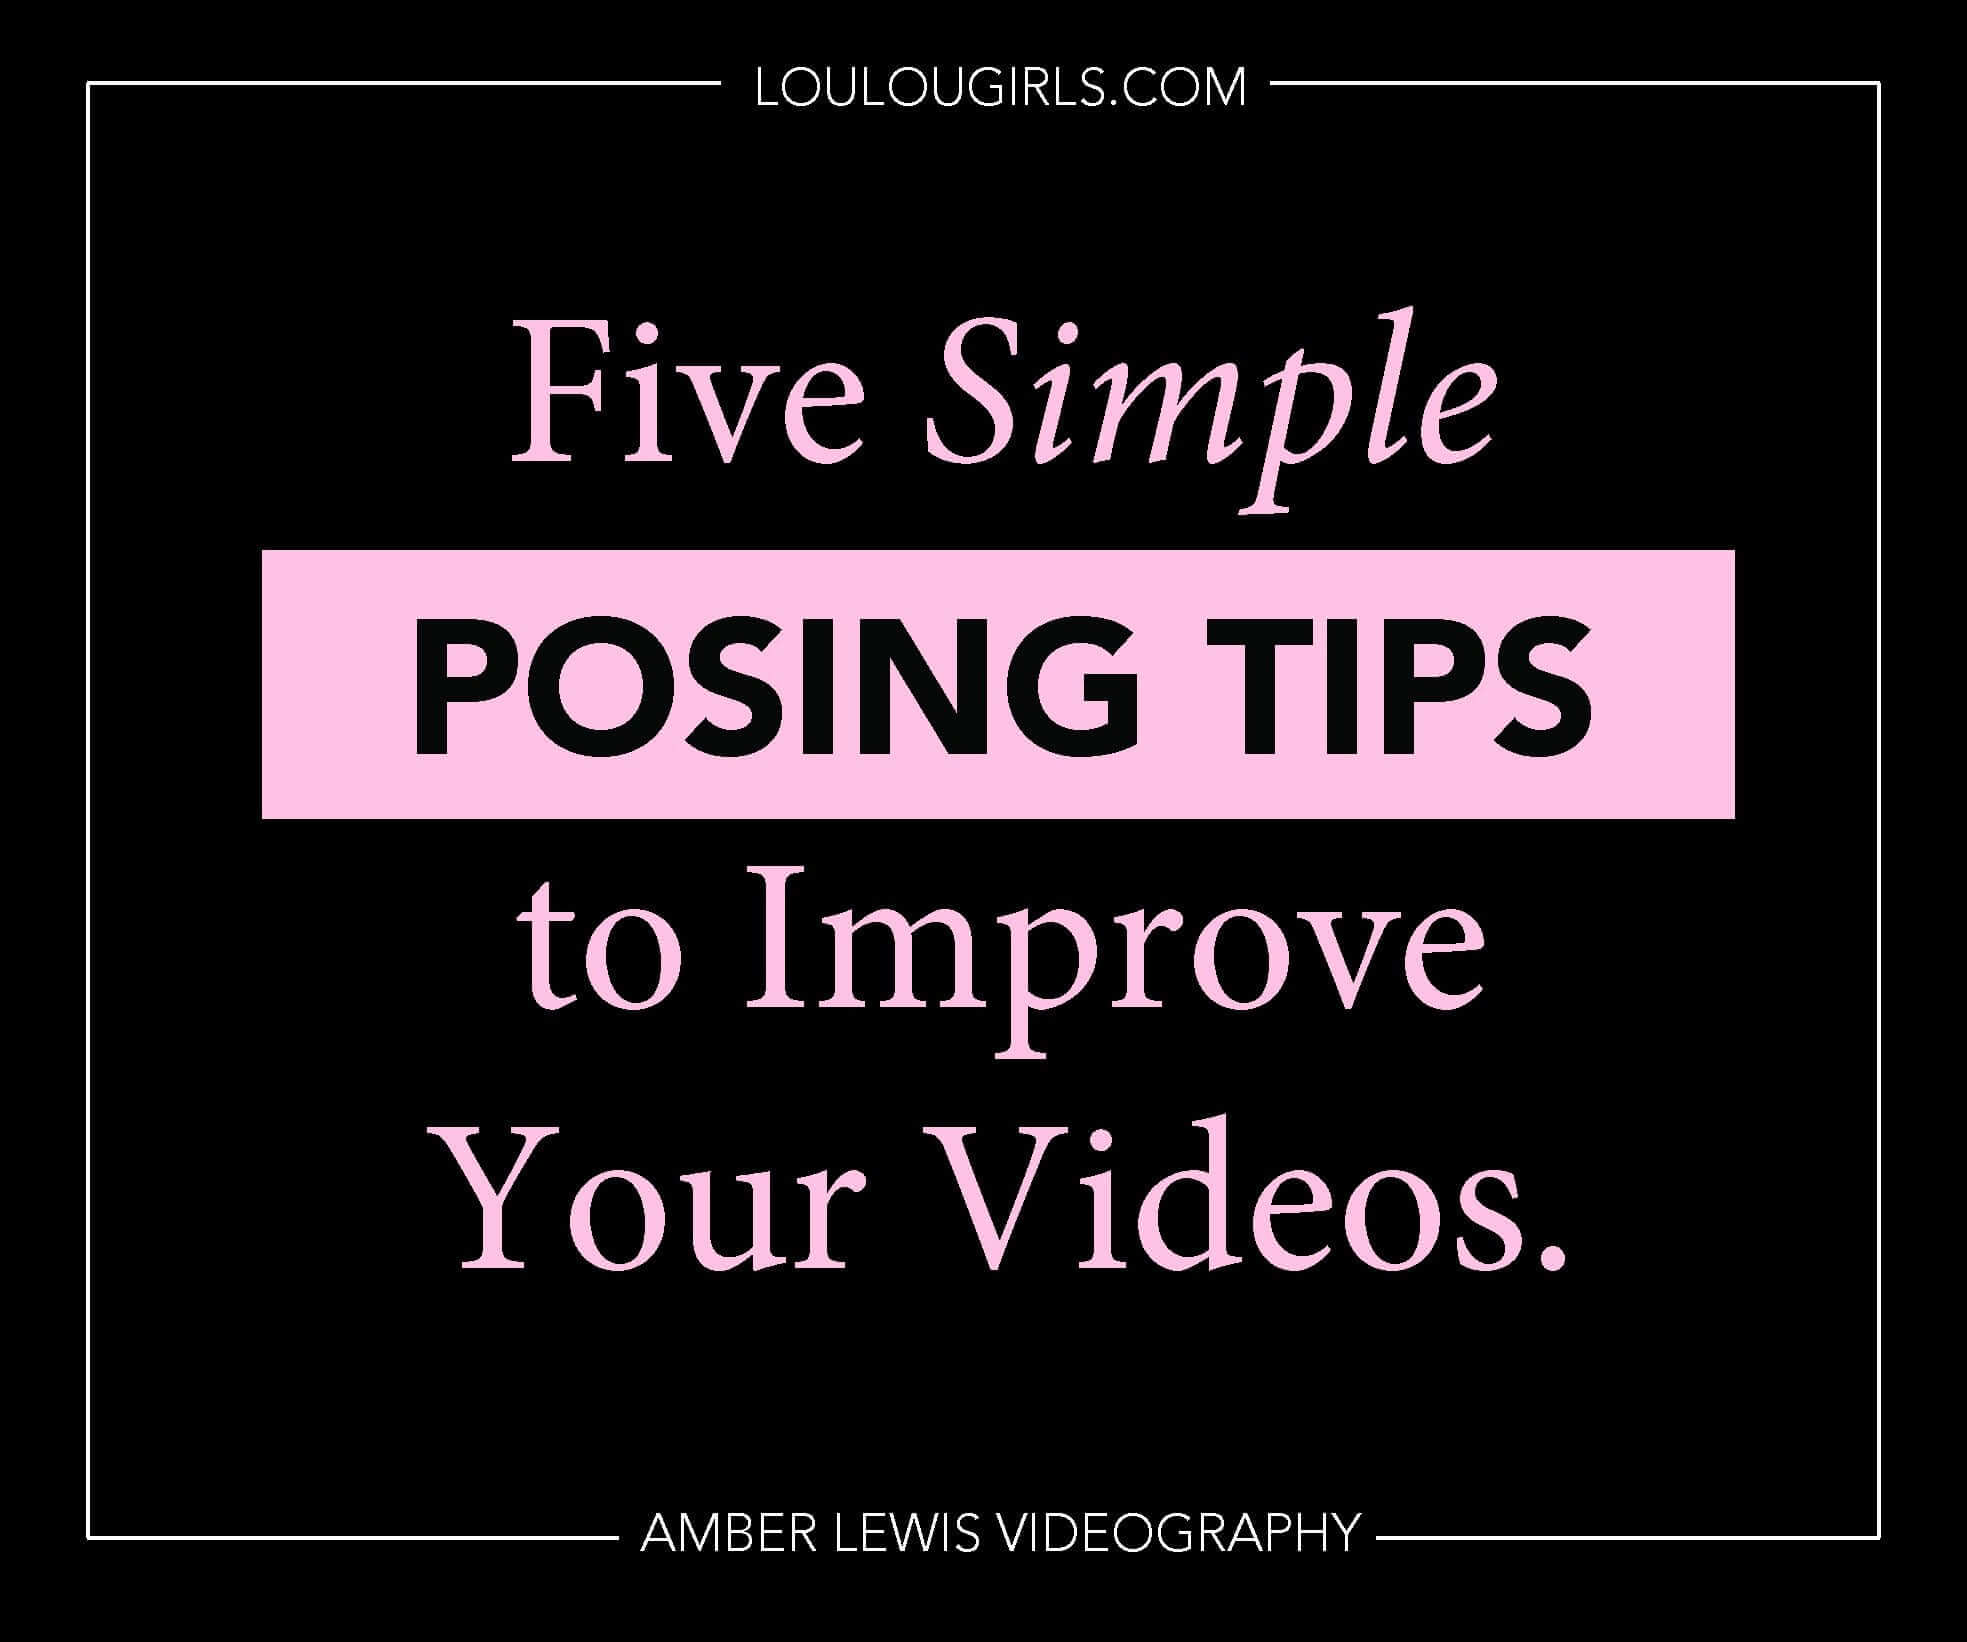 5 Posing Tips to Improve Videos